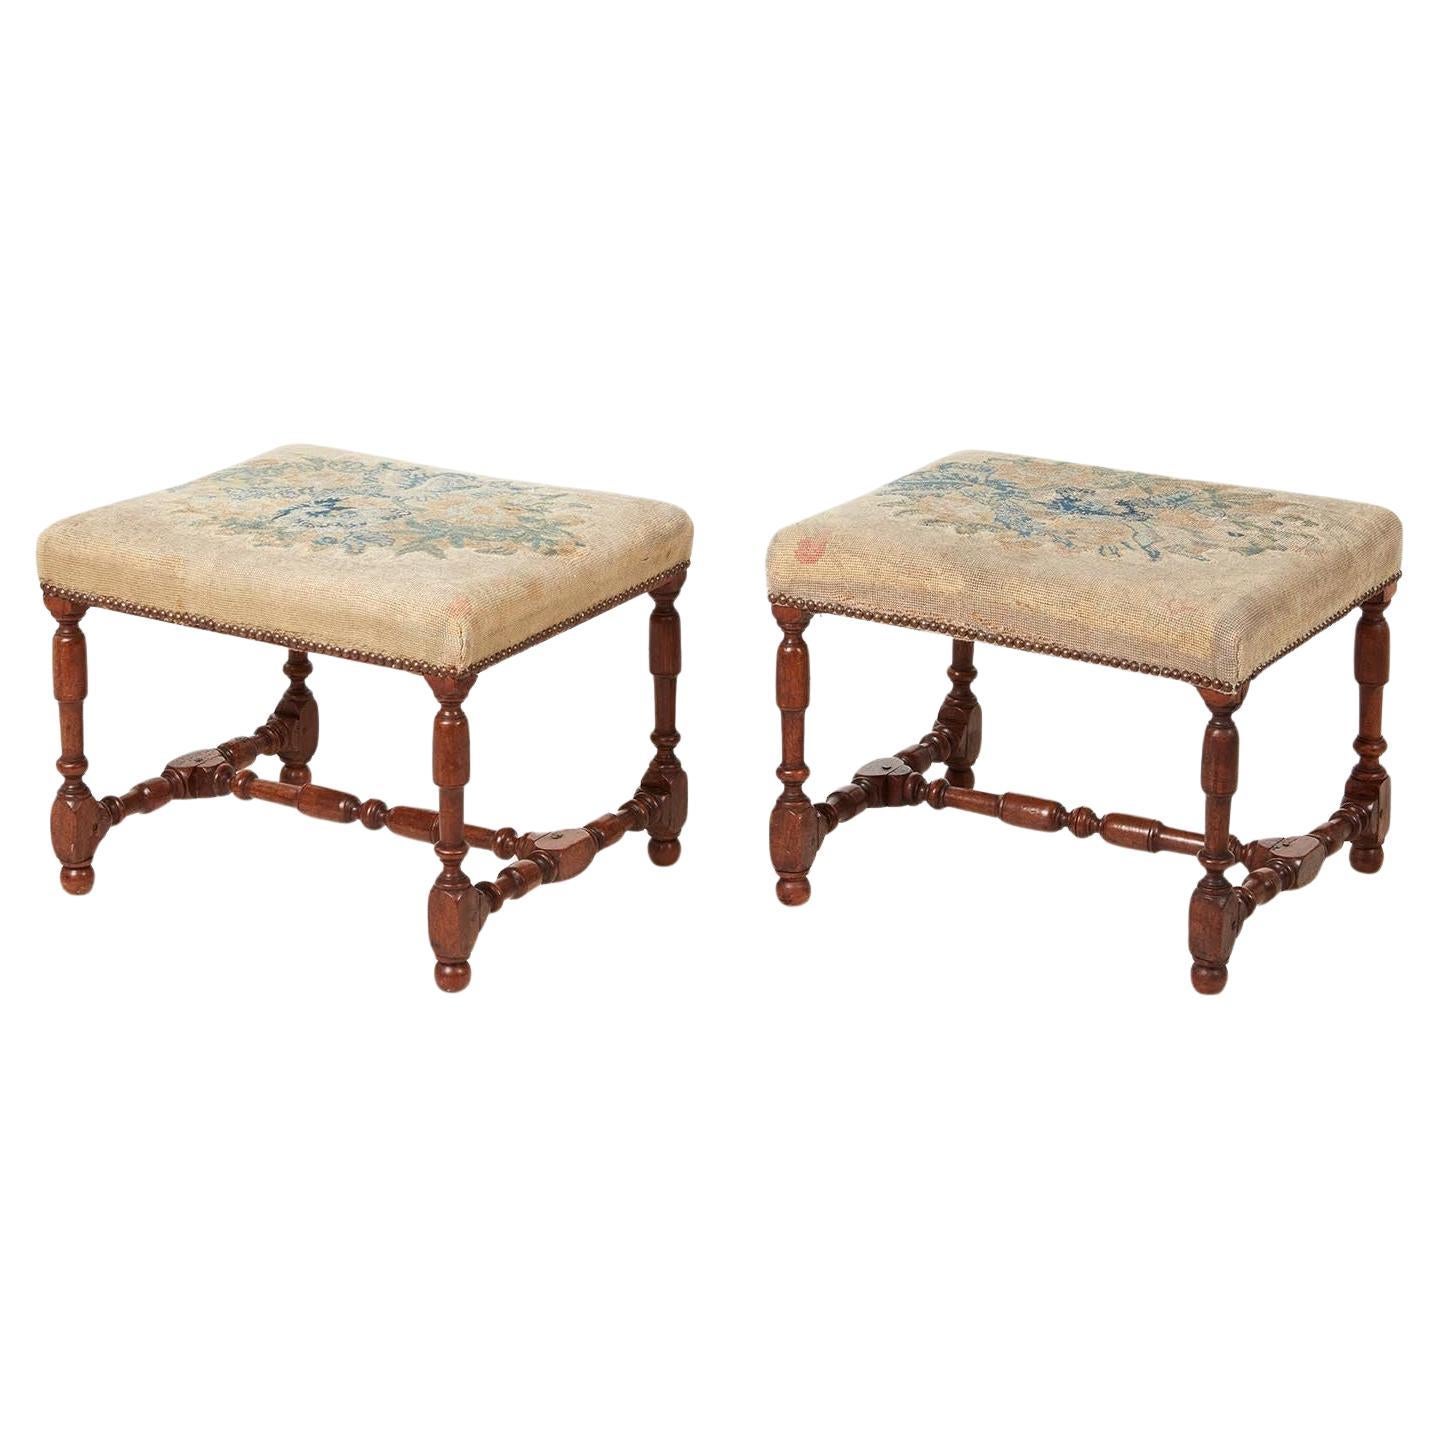 A Rare Pair of Baroque Walnut Needlework Benches For Sale